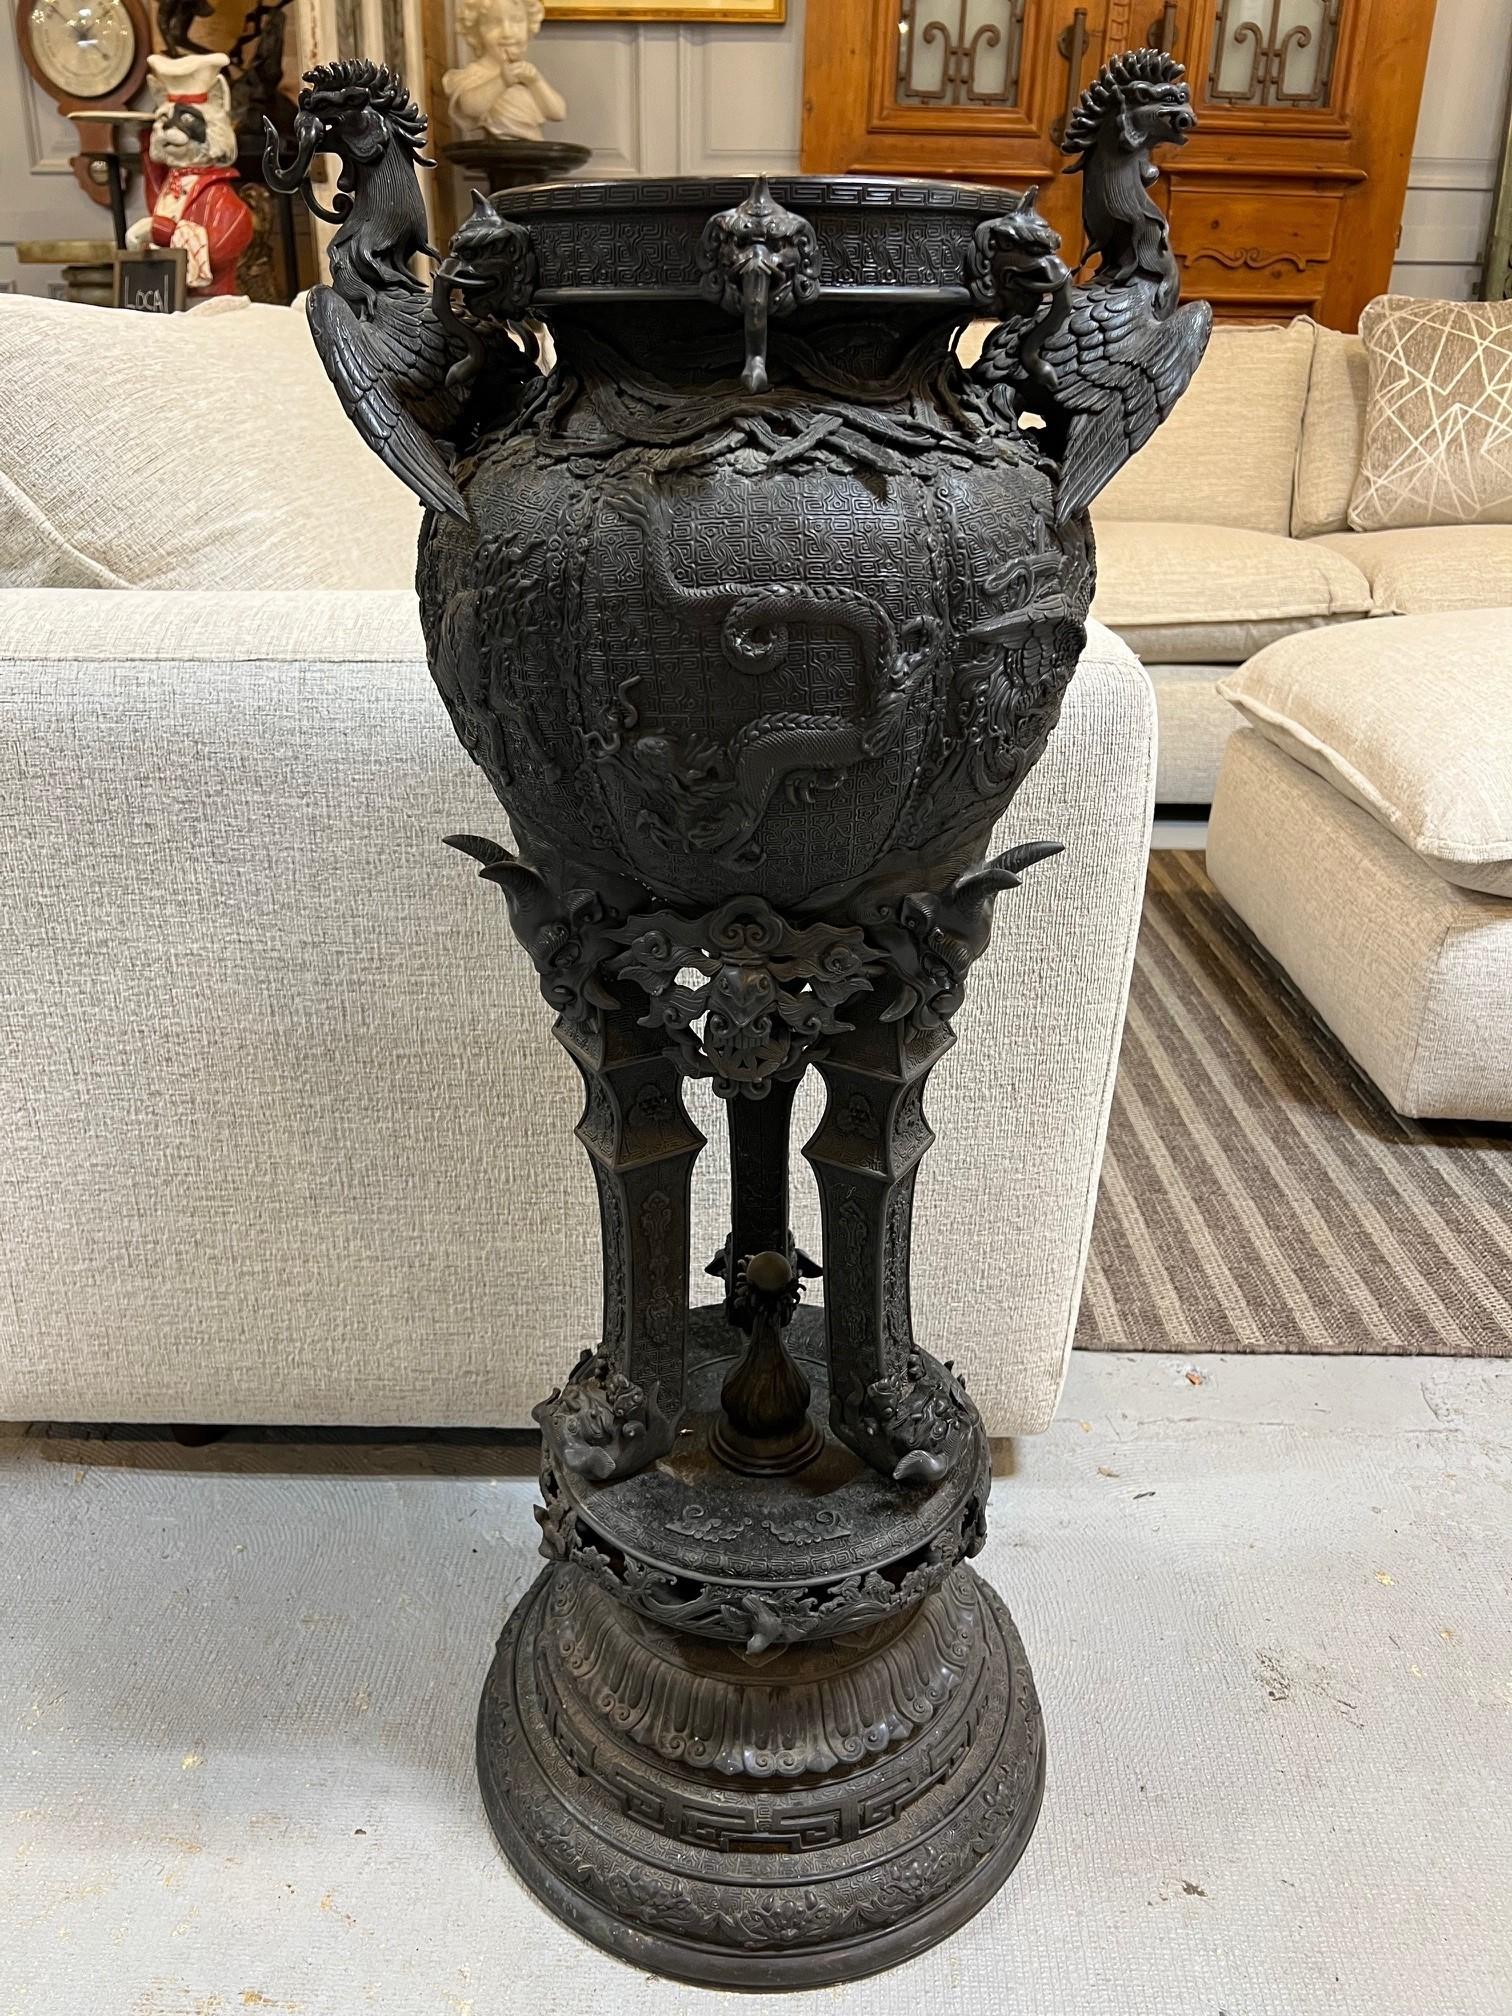 Dating from the Meiji period this standing Japanese Koro or incense burner has a circular stepped base. Three legs topped with horned and other demons standing on upside down foo dogs. Elephant heads on the rim and phoenix birds, wing spread, upper